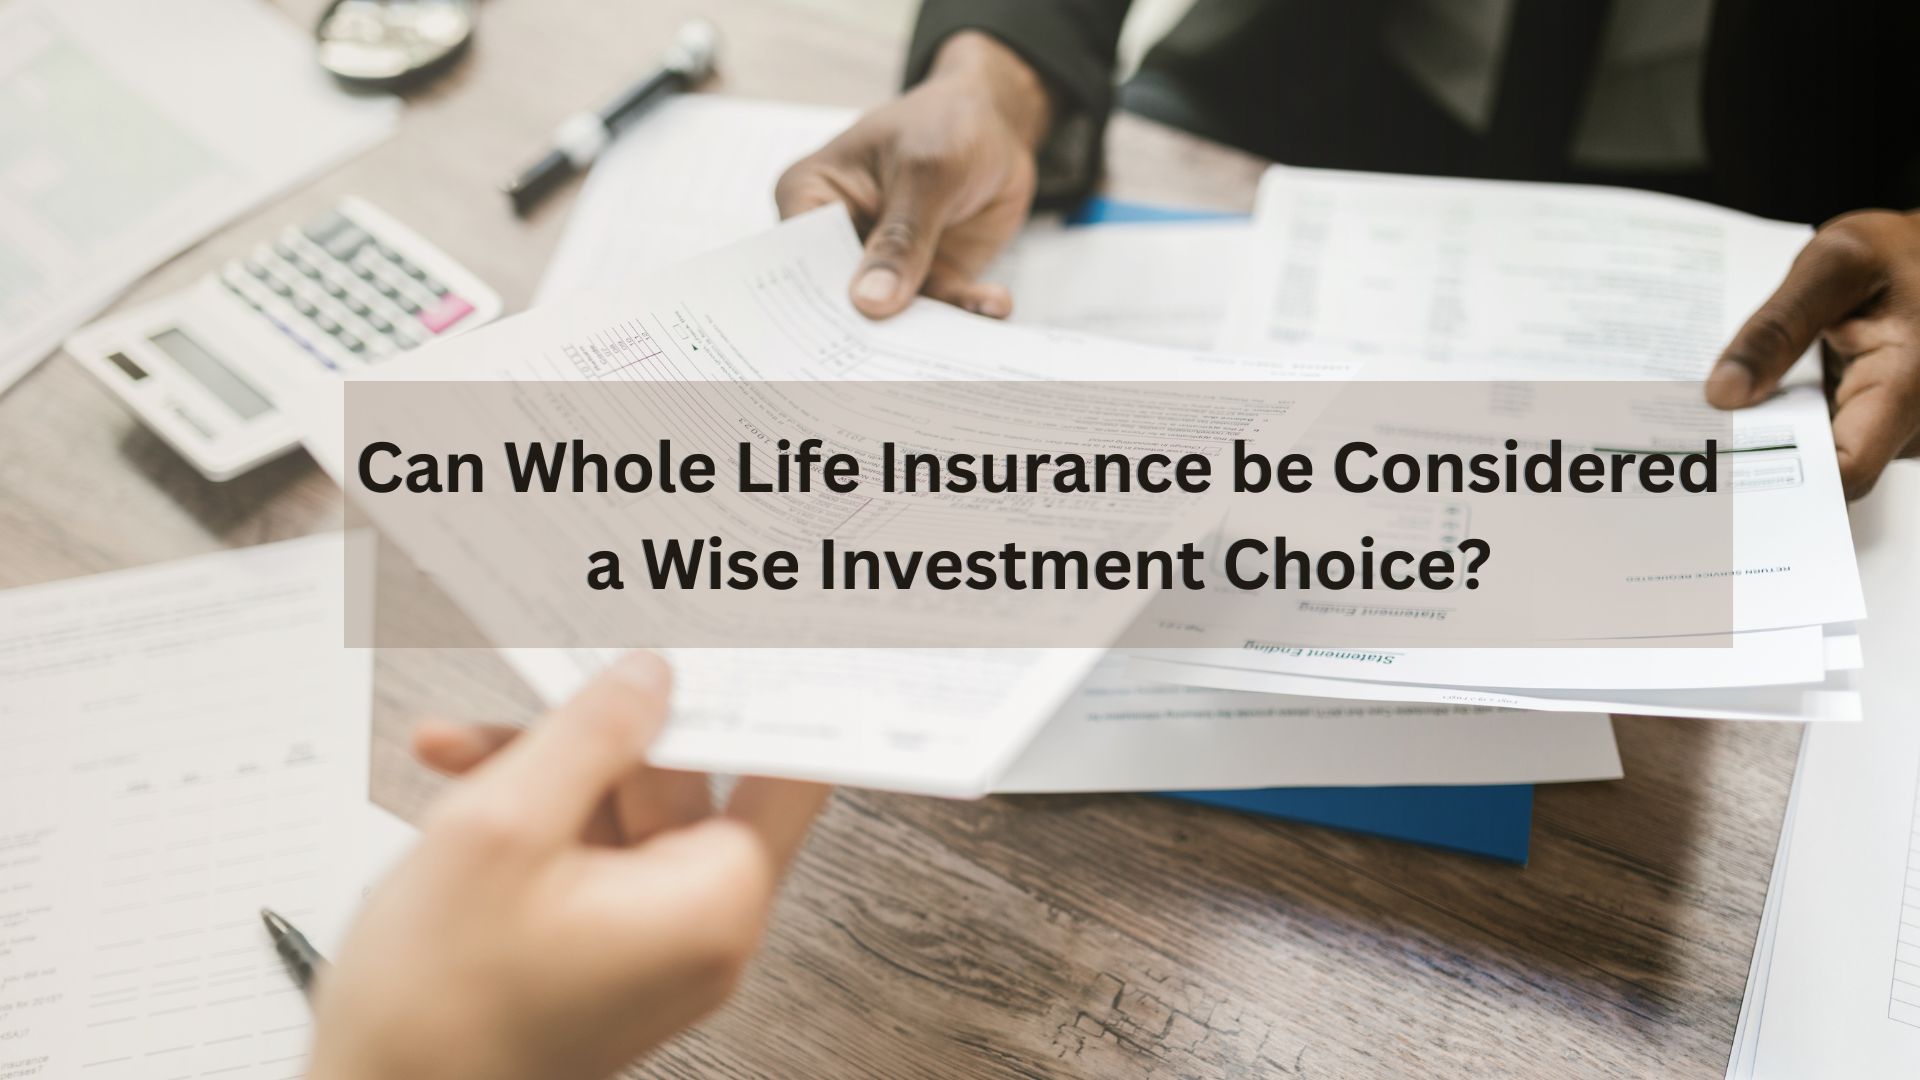 Whole Life Insurance as an Investment Option